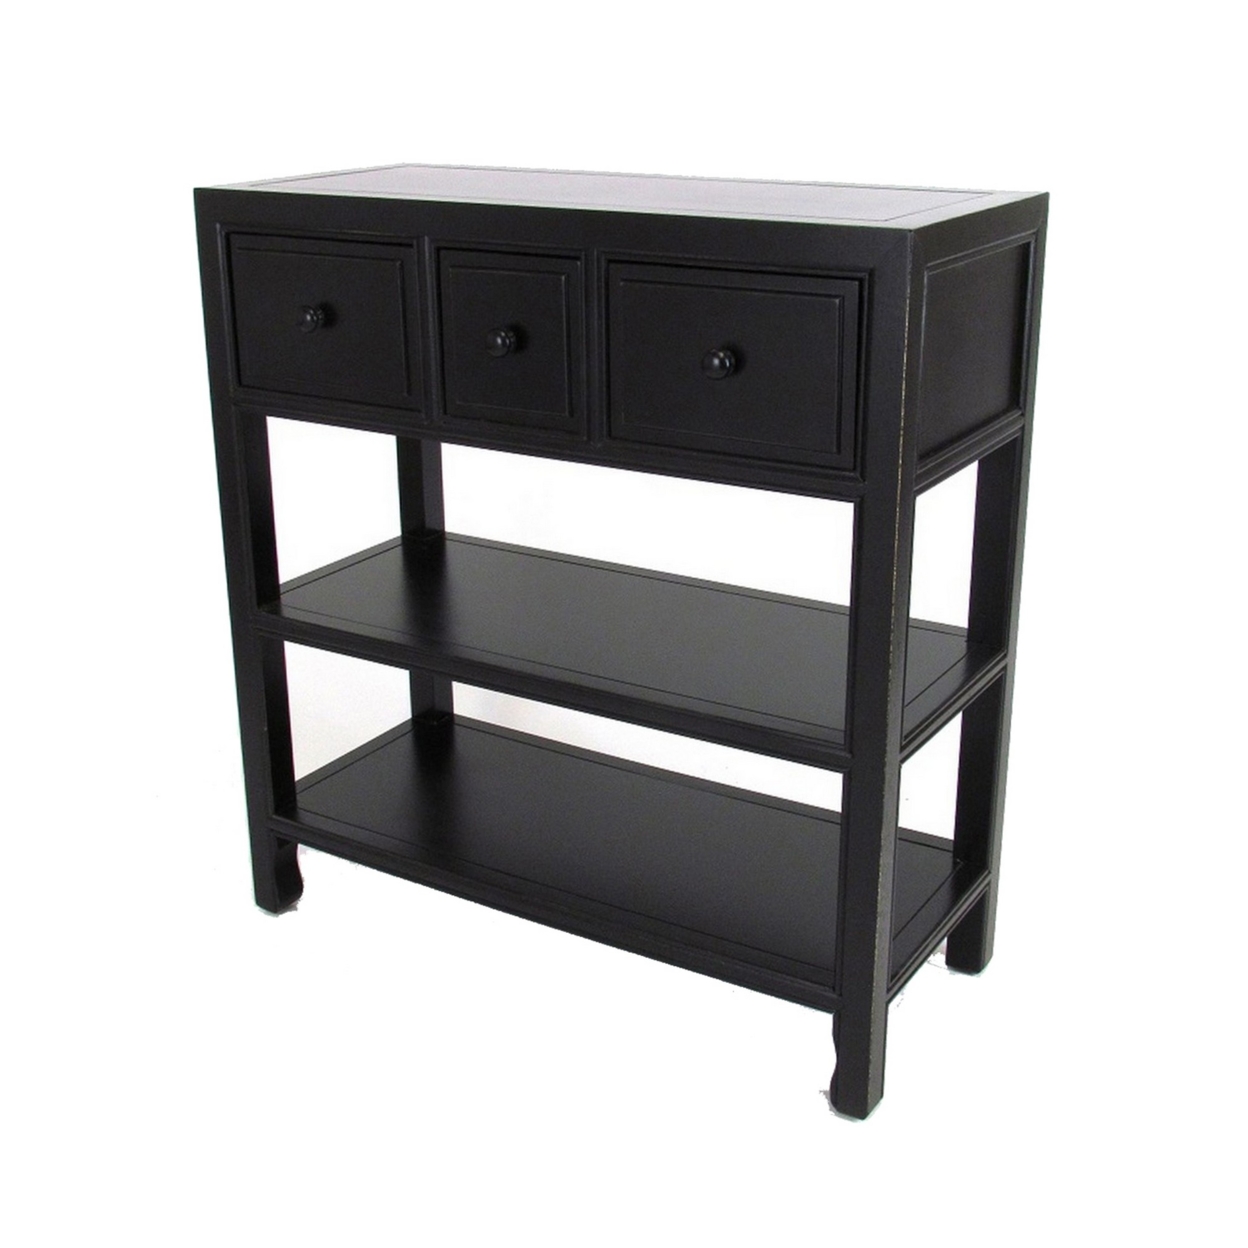 Wooden Console Table With 3 Drawers And 2 Shelves, Black- Saltoro Sherpi